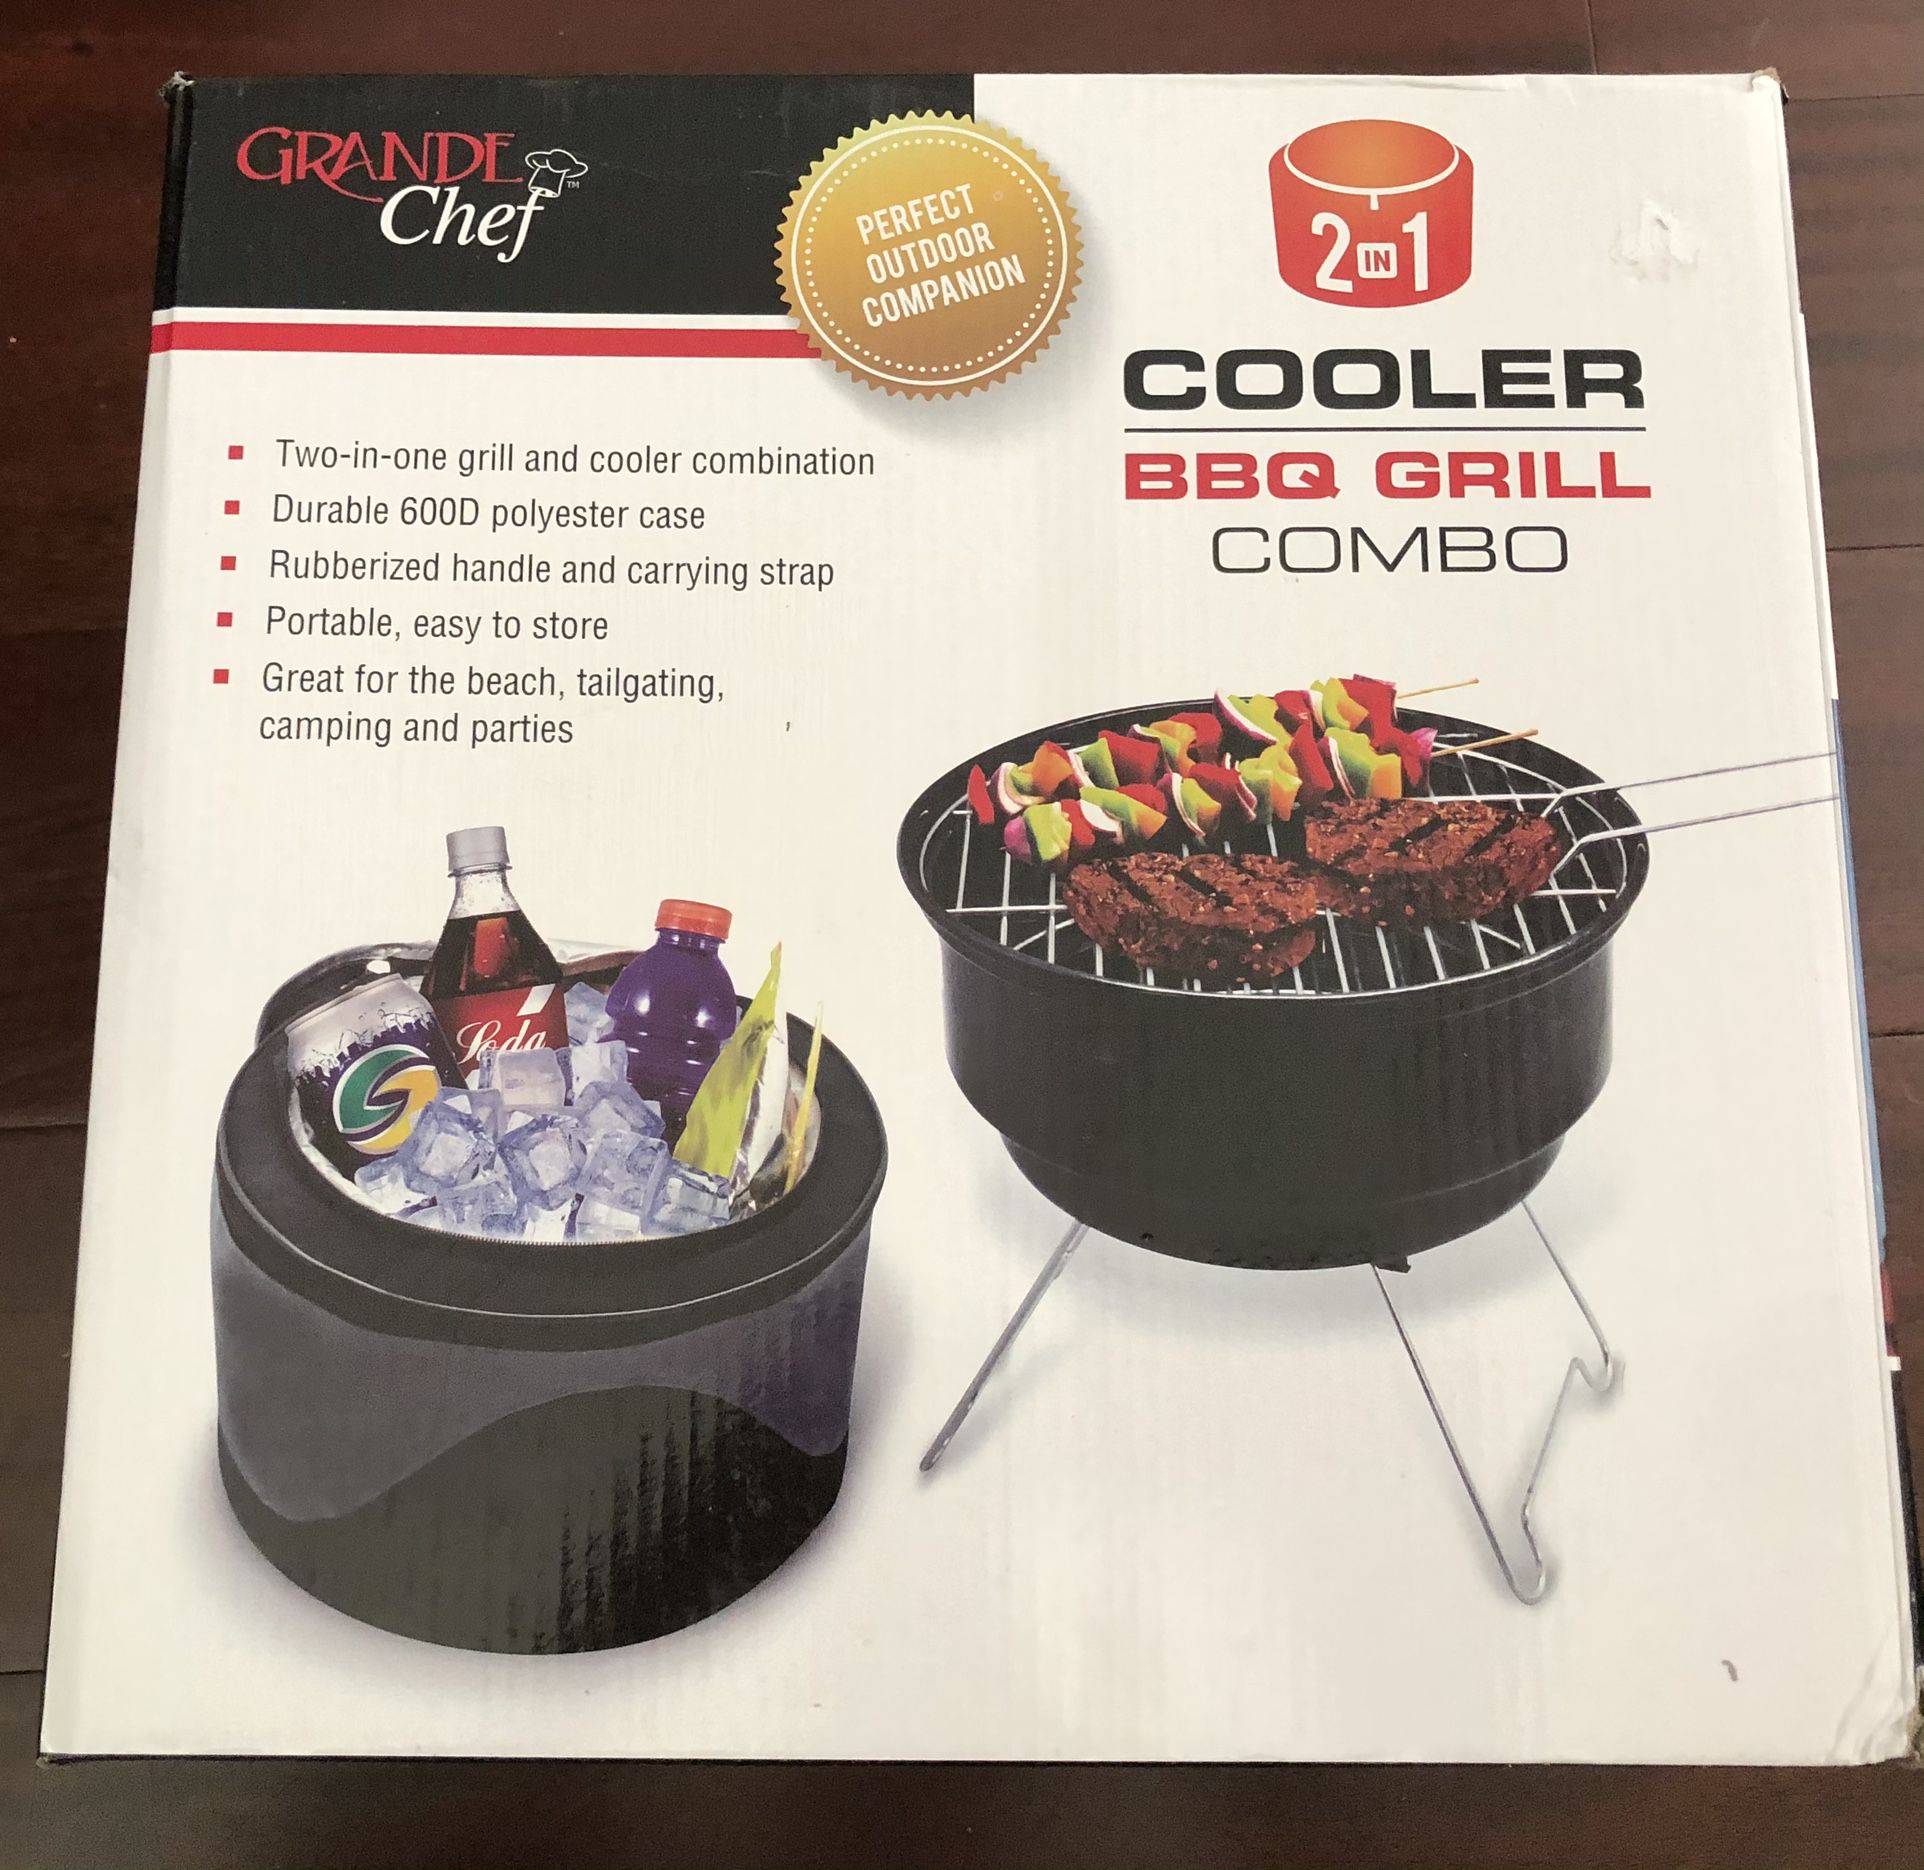 2 In 1 Cooler And Bbq Grill Combo